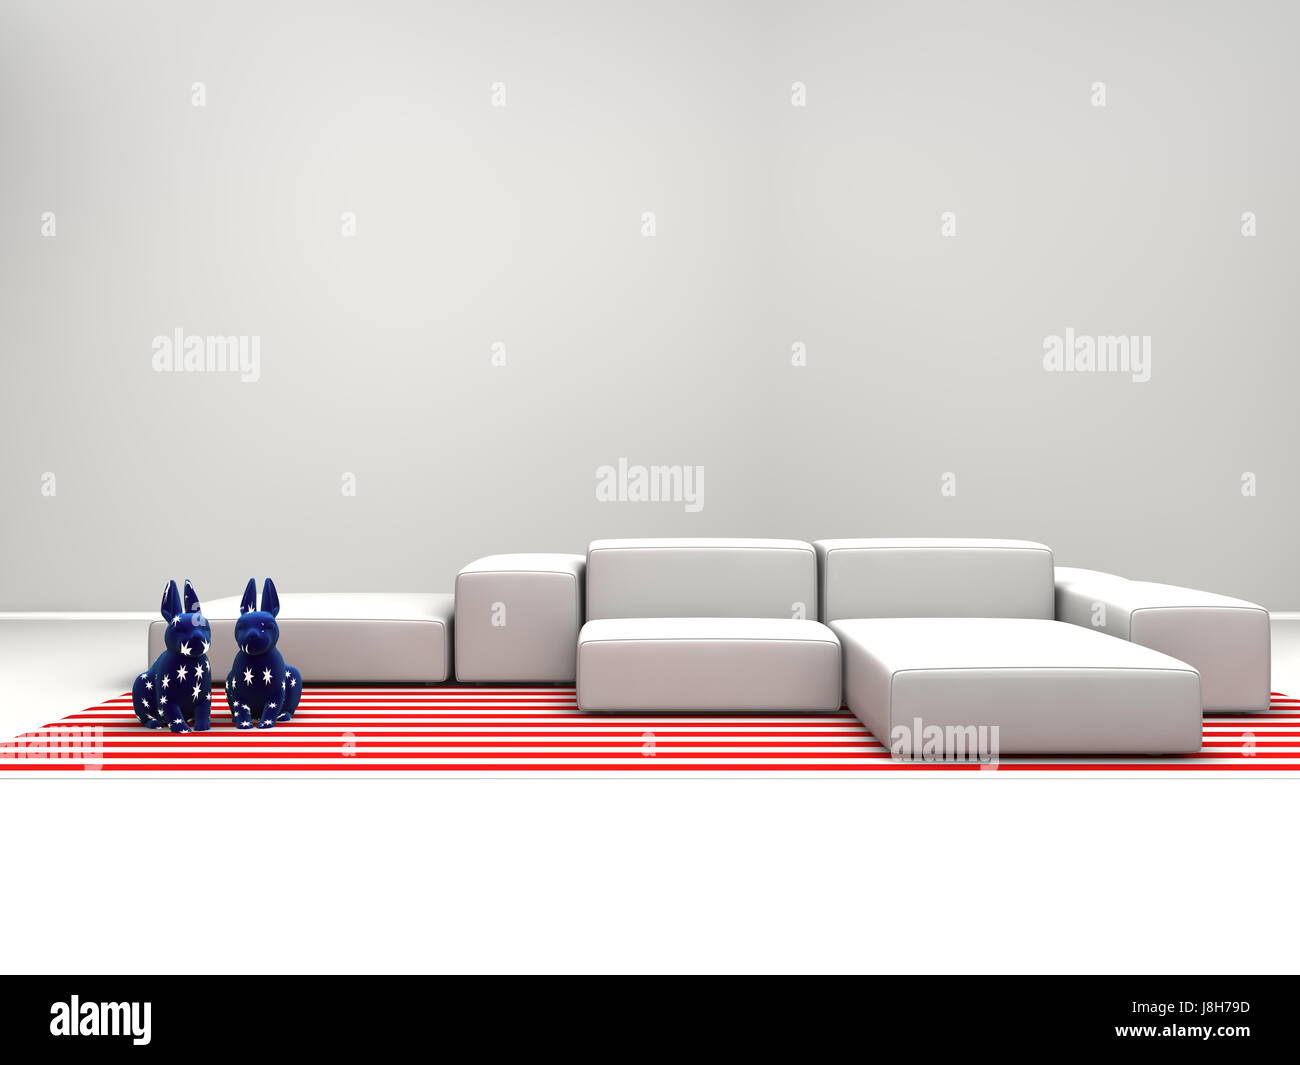 model, design, project, concept, plan, draft, modern, modernity, couch, sofa, Stock Photo